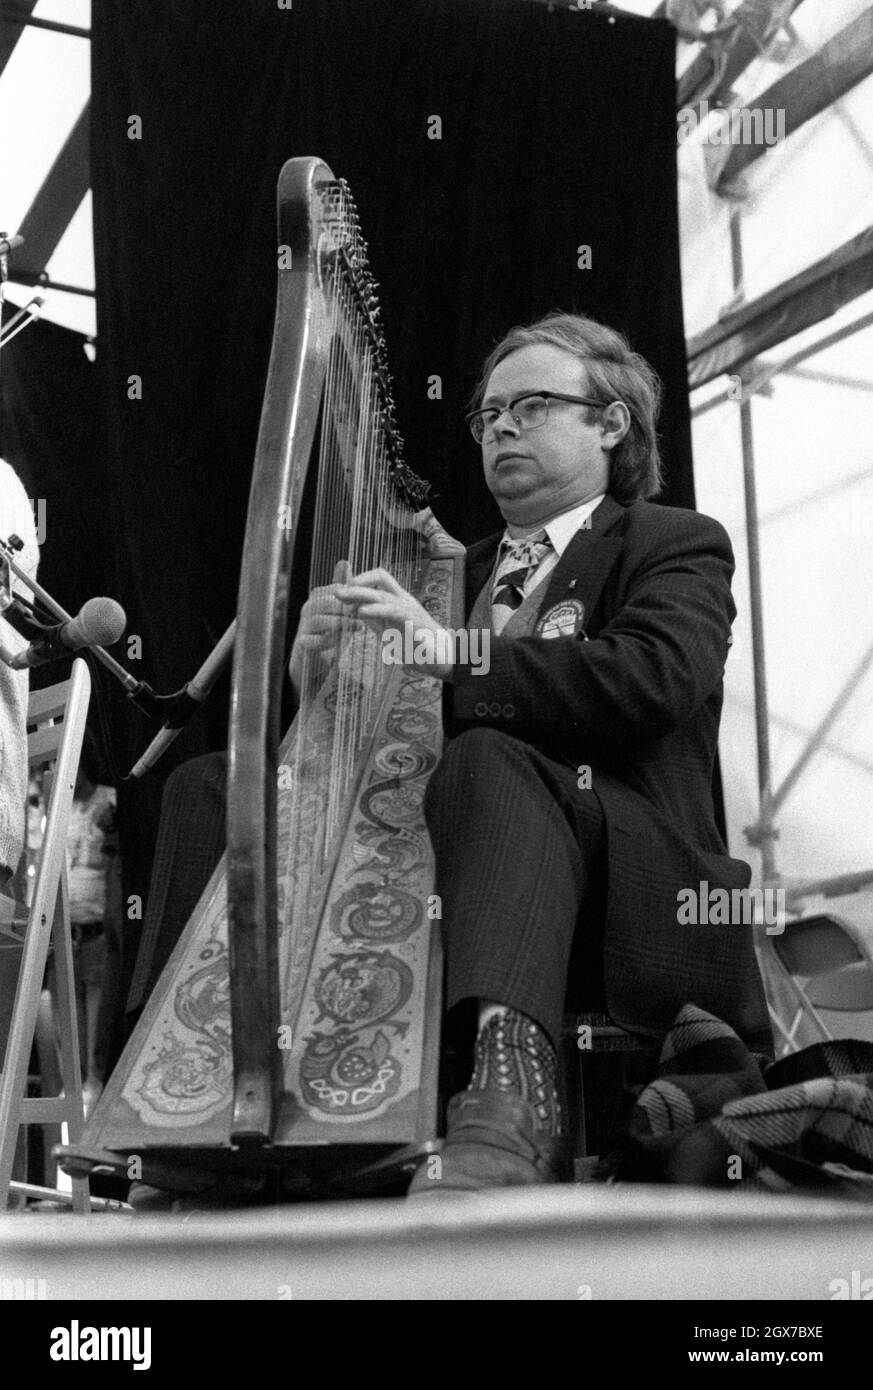 Harpist Derek Bell, MBE performing with The Chieftains at the July Wakes folk festival in Chorley, Lancashire, England on 25 July 1976. Stock Photo